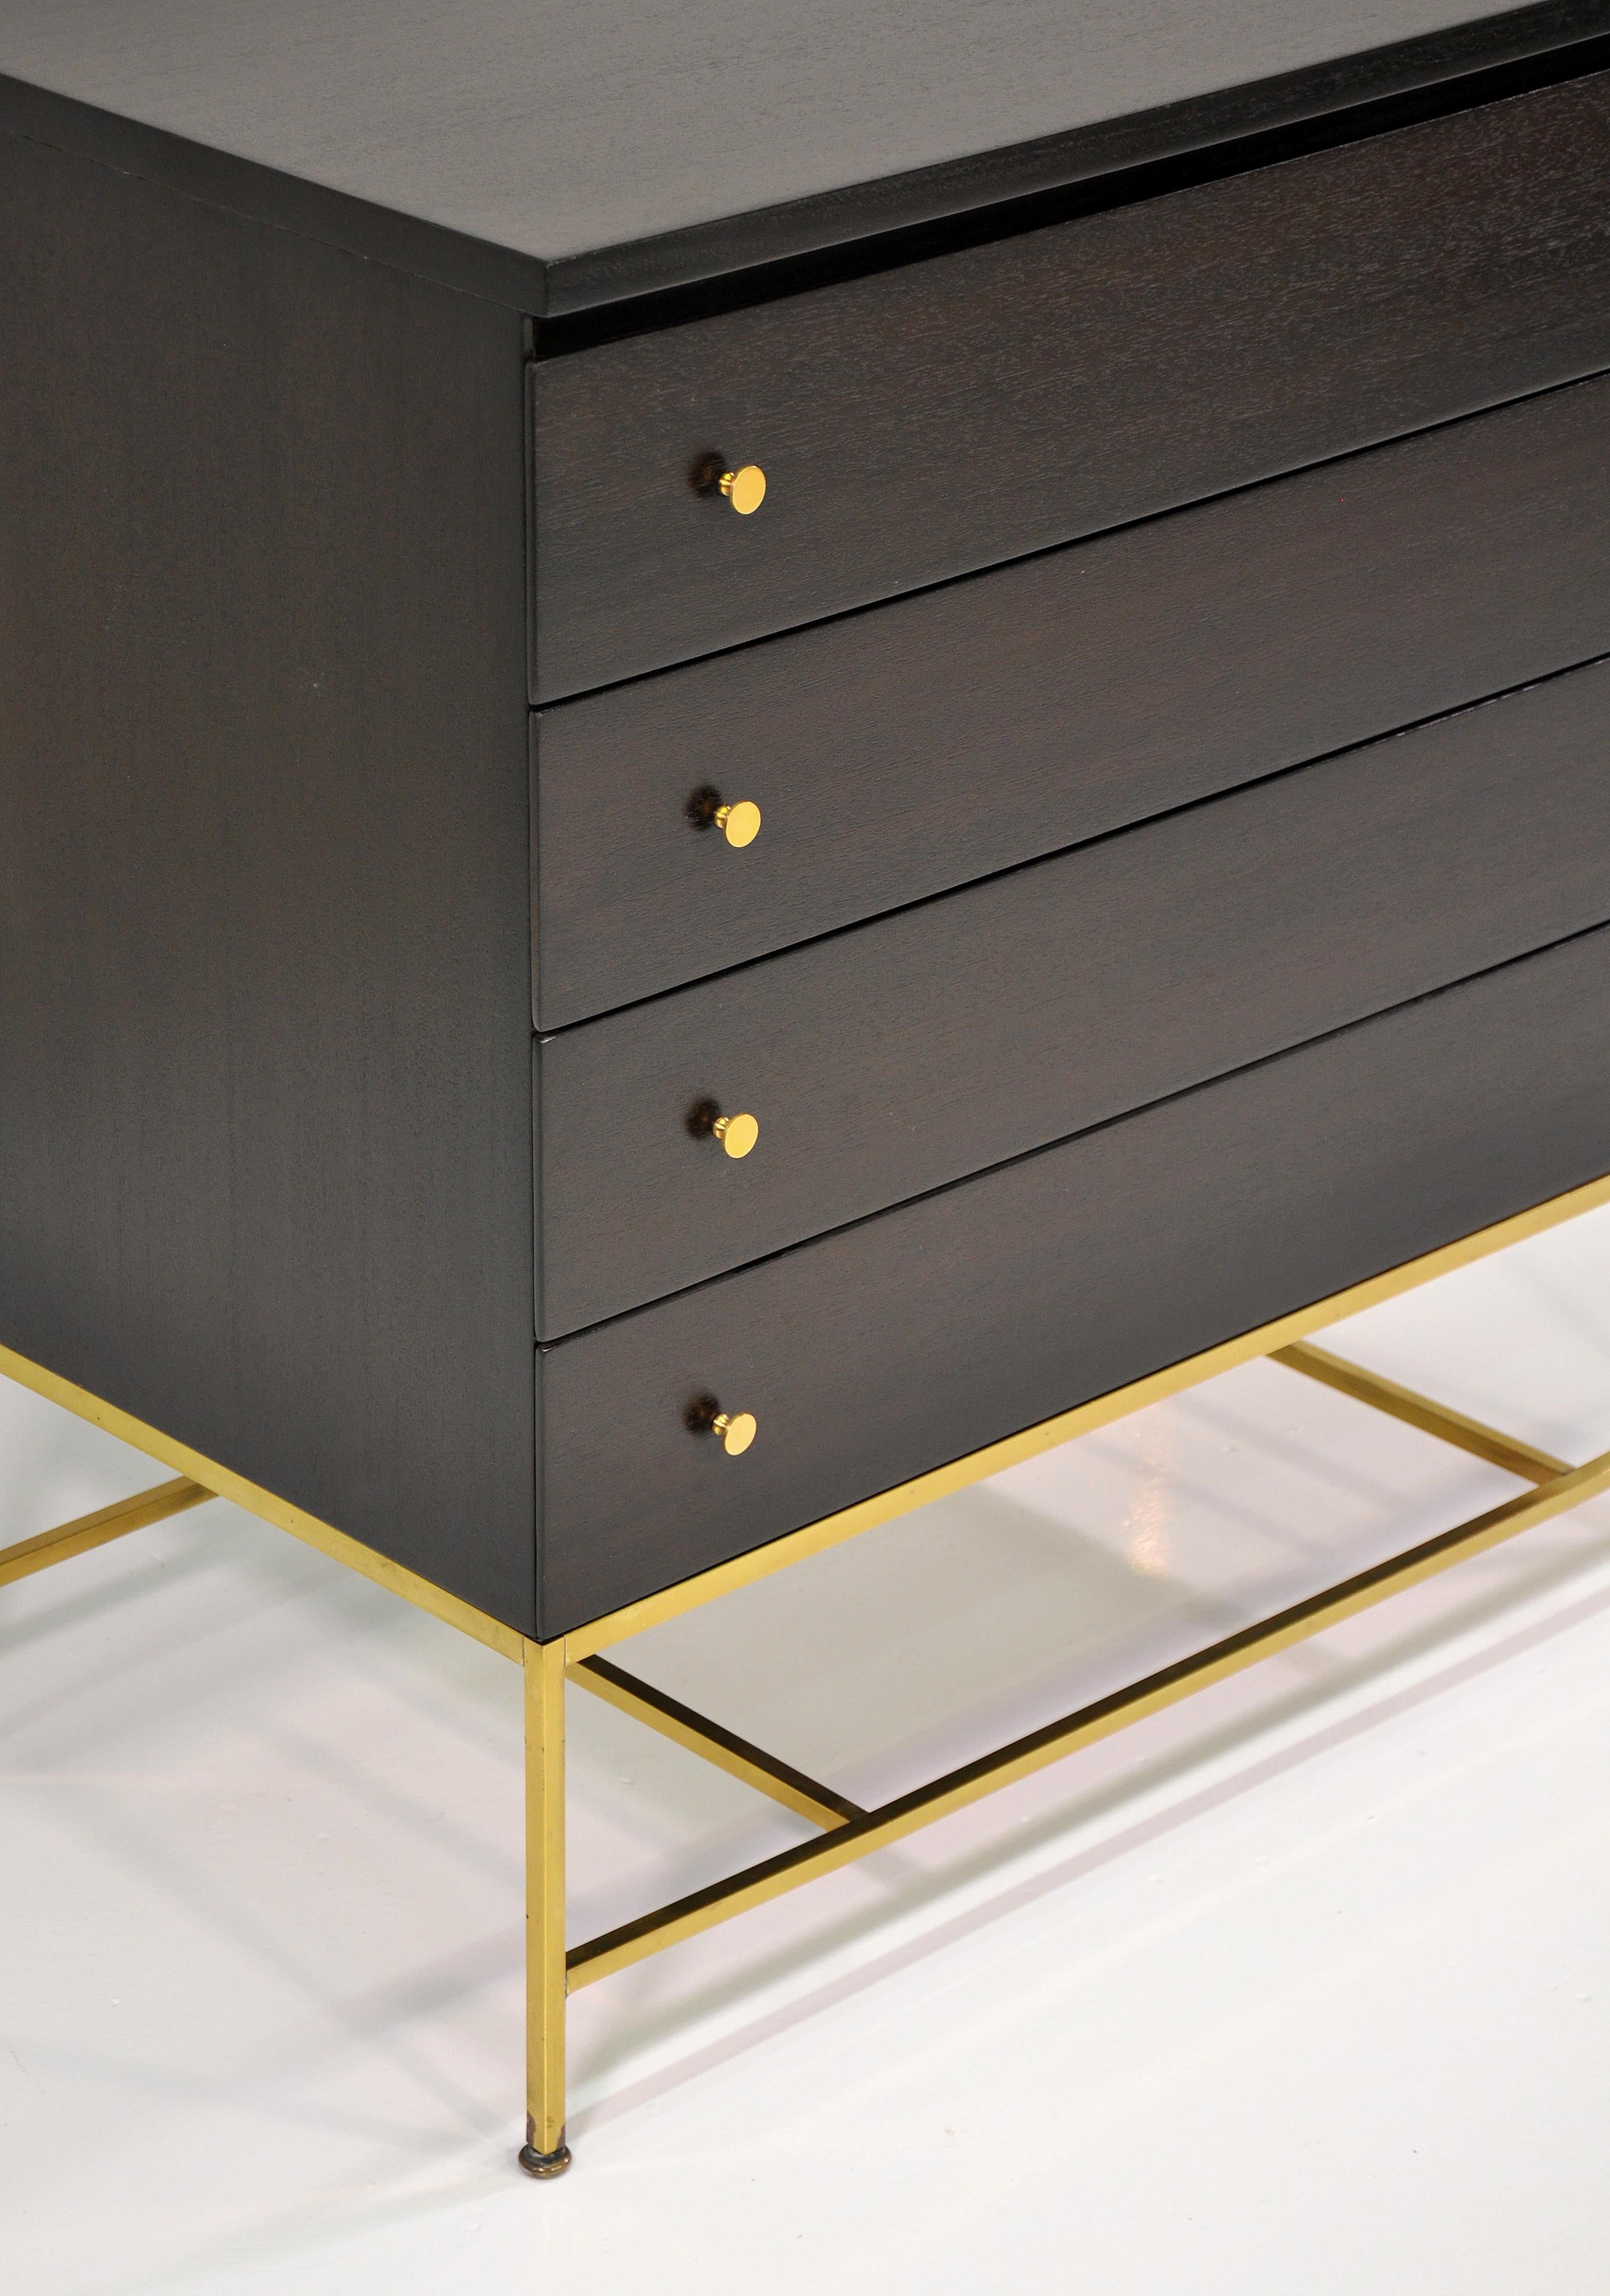 Stunning mahogany and brass chest of drawers from the Irwin Collection designed by Paul McCobb for Directional Furniture; manufactured by Calvin Group, c. 1956. The dresser features an elegant polished brass base and spanners with signature solid